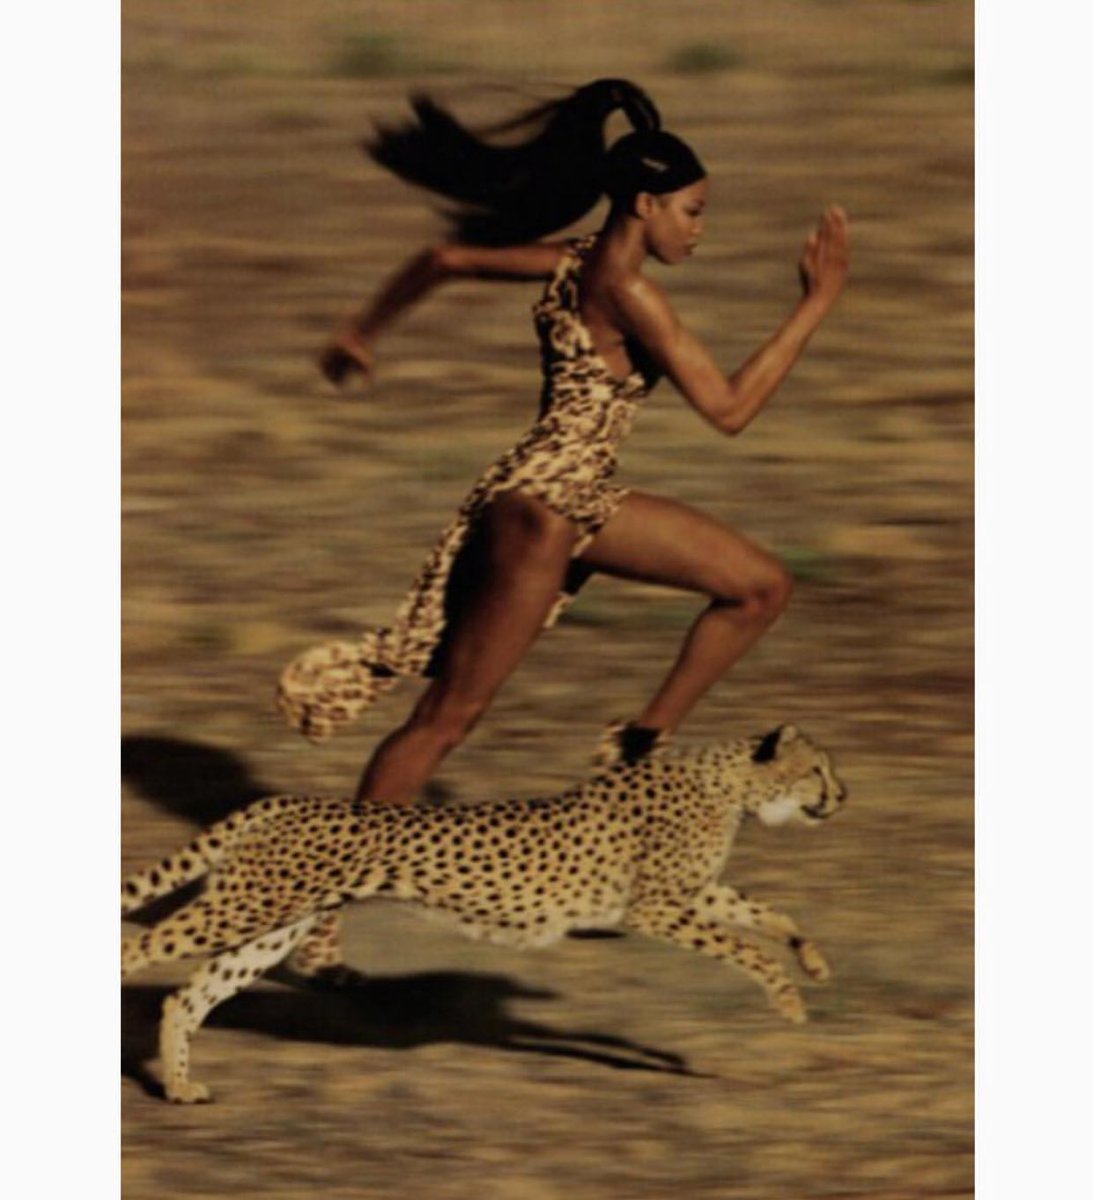 #tbt running with the wild #jeanpaulgoude https://t.co/22vtiryGyn